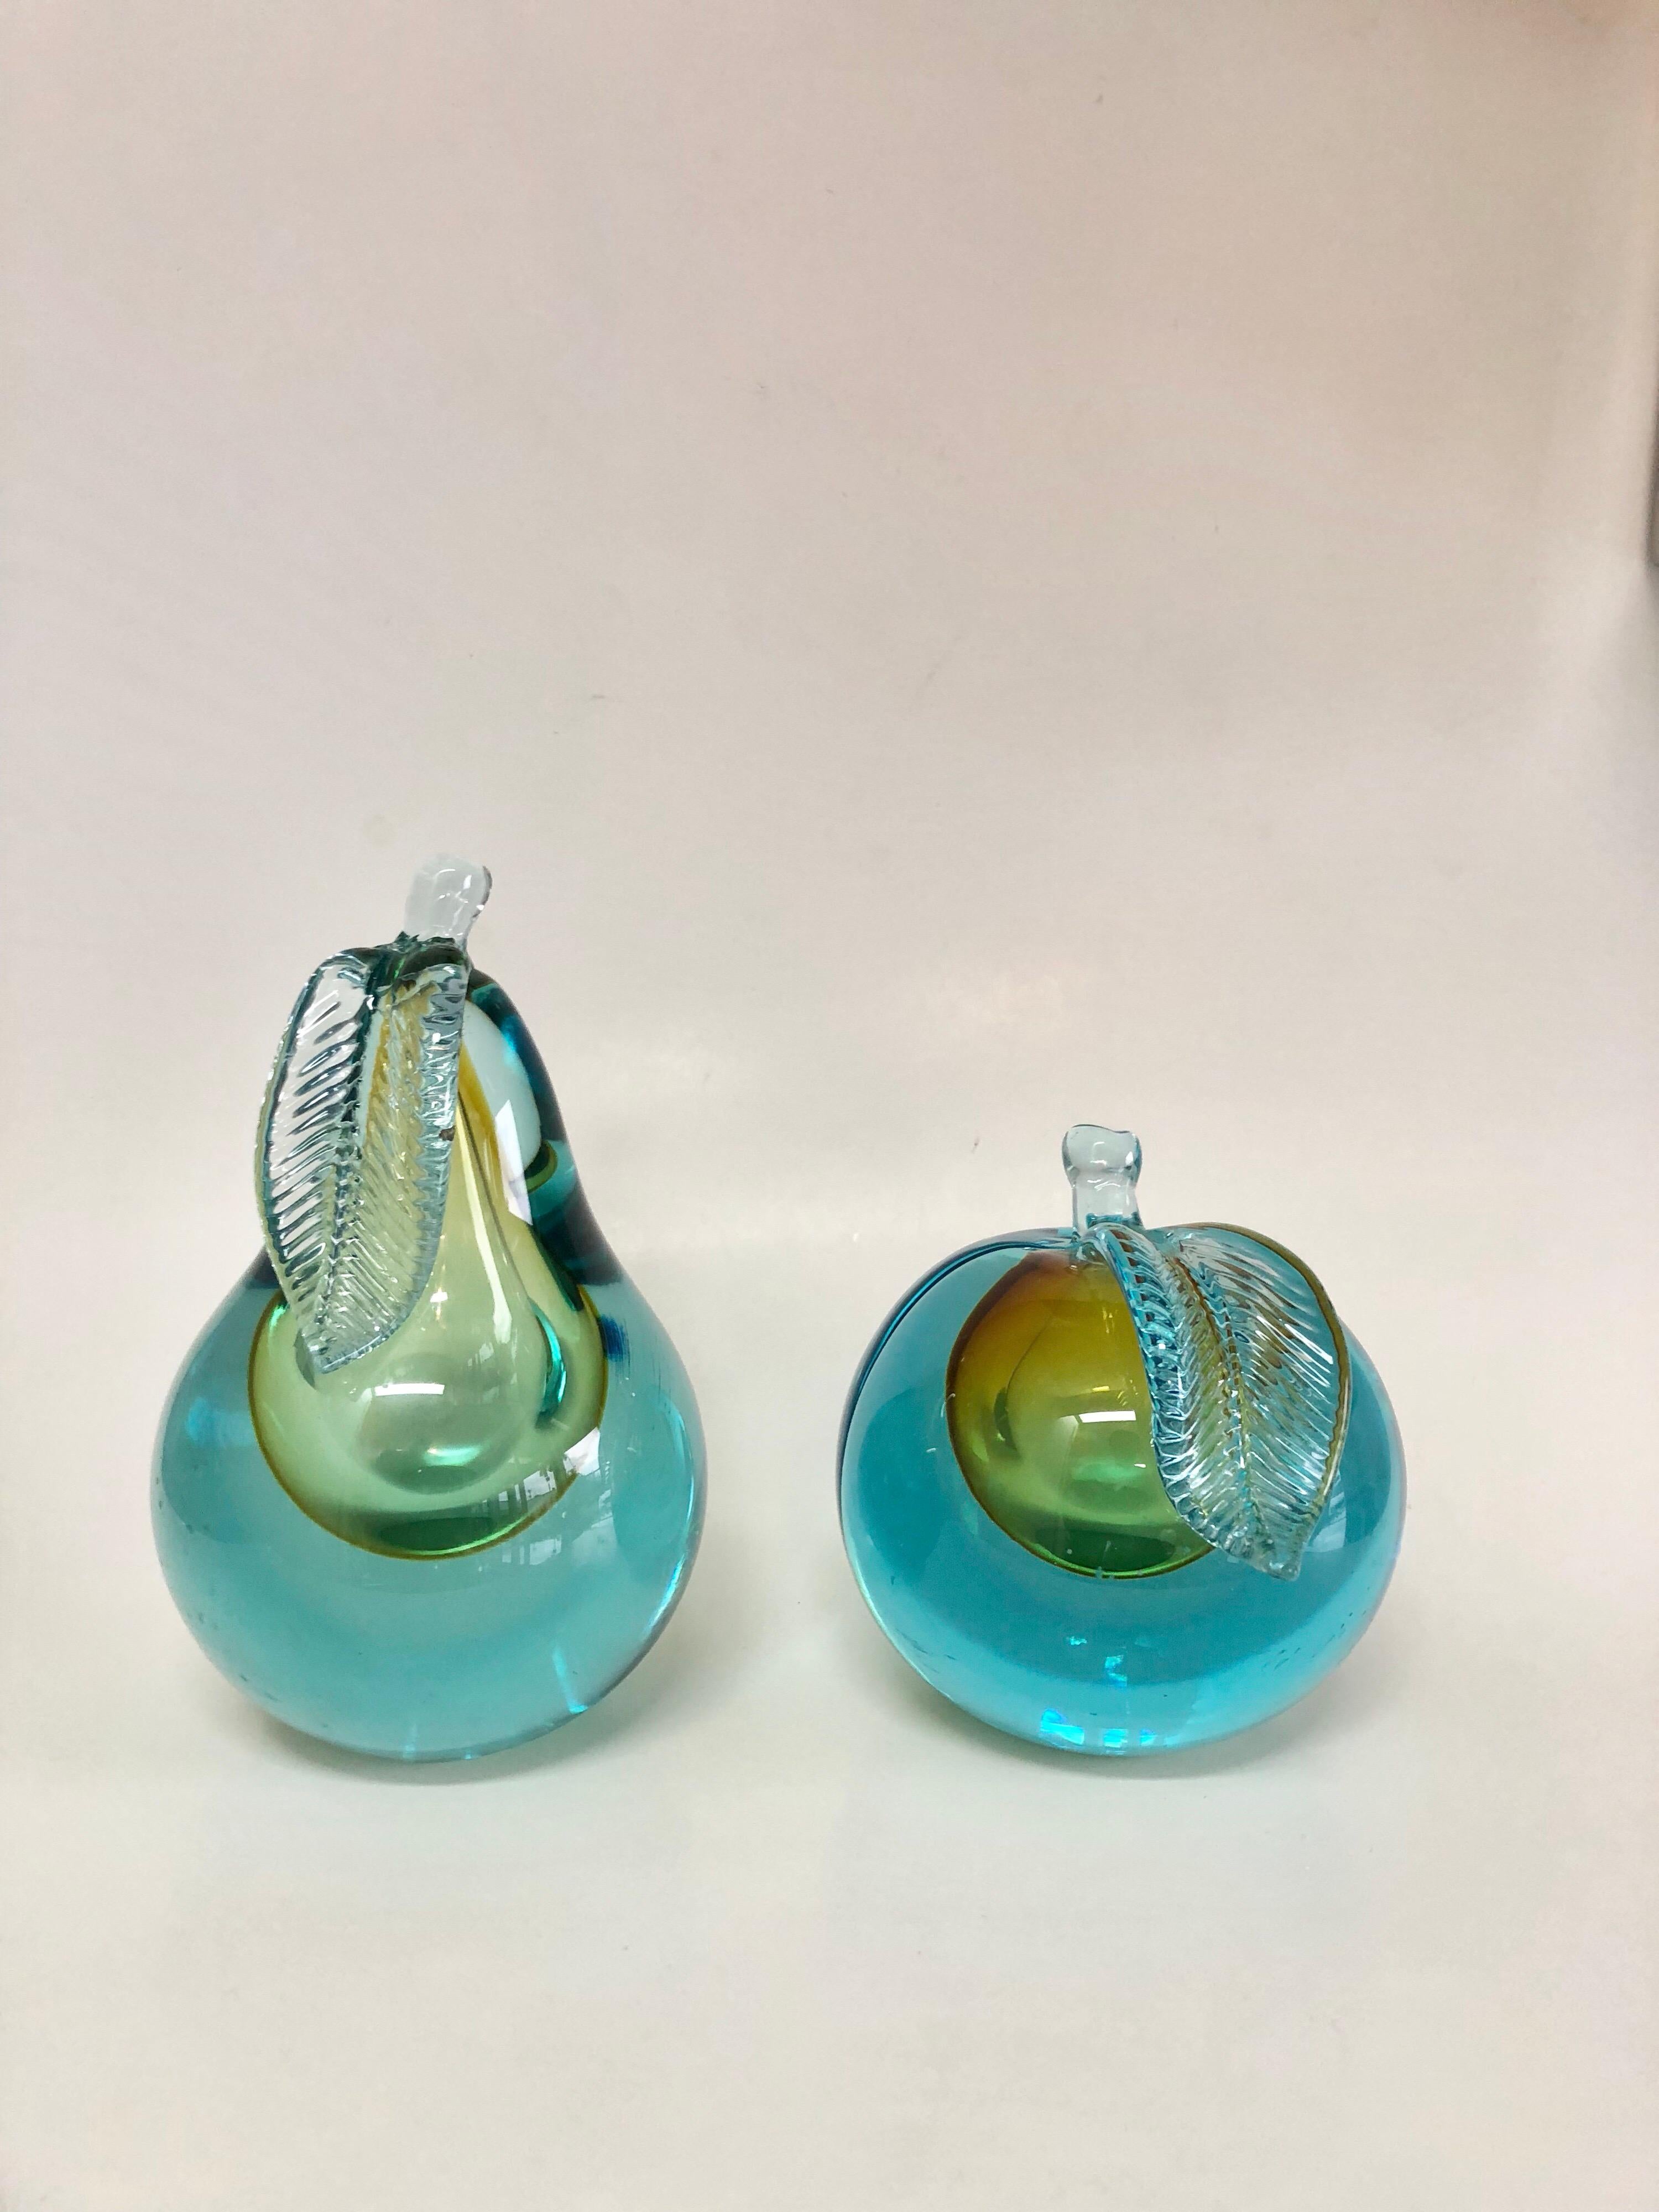 A set of apple and pear bookends in Murano Sommerso art glass. Great set of vintage Murano glass. Nice shapes and colors.